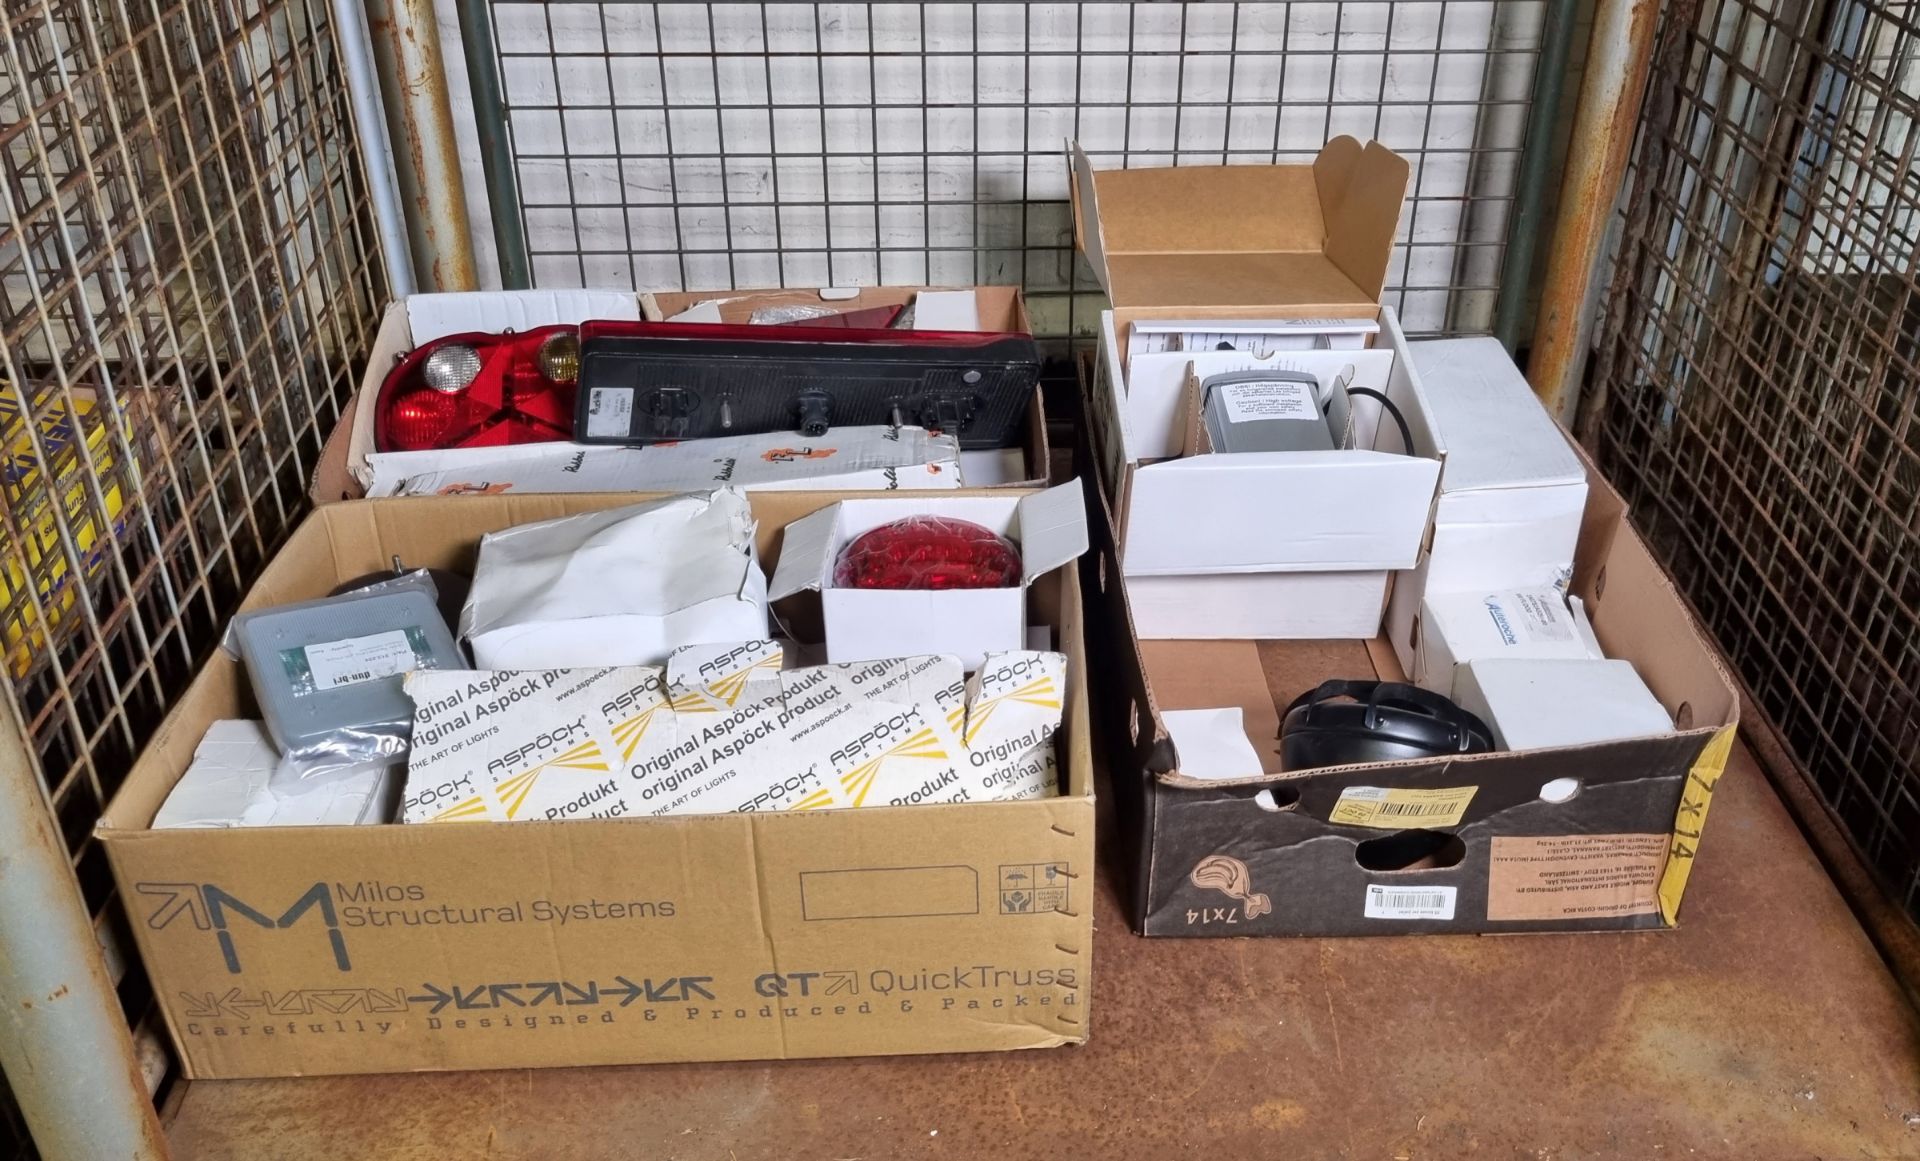 Lighting parts - rear truck lights and spotlights - mixed types and sizes